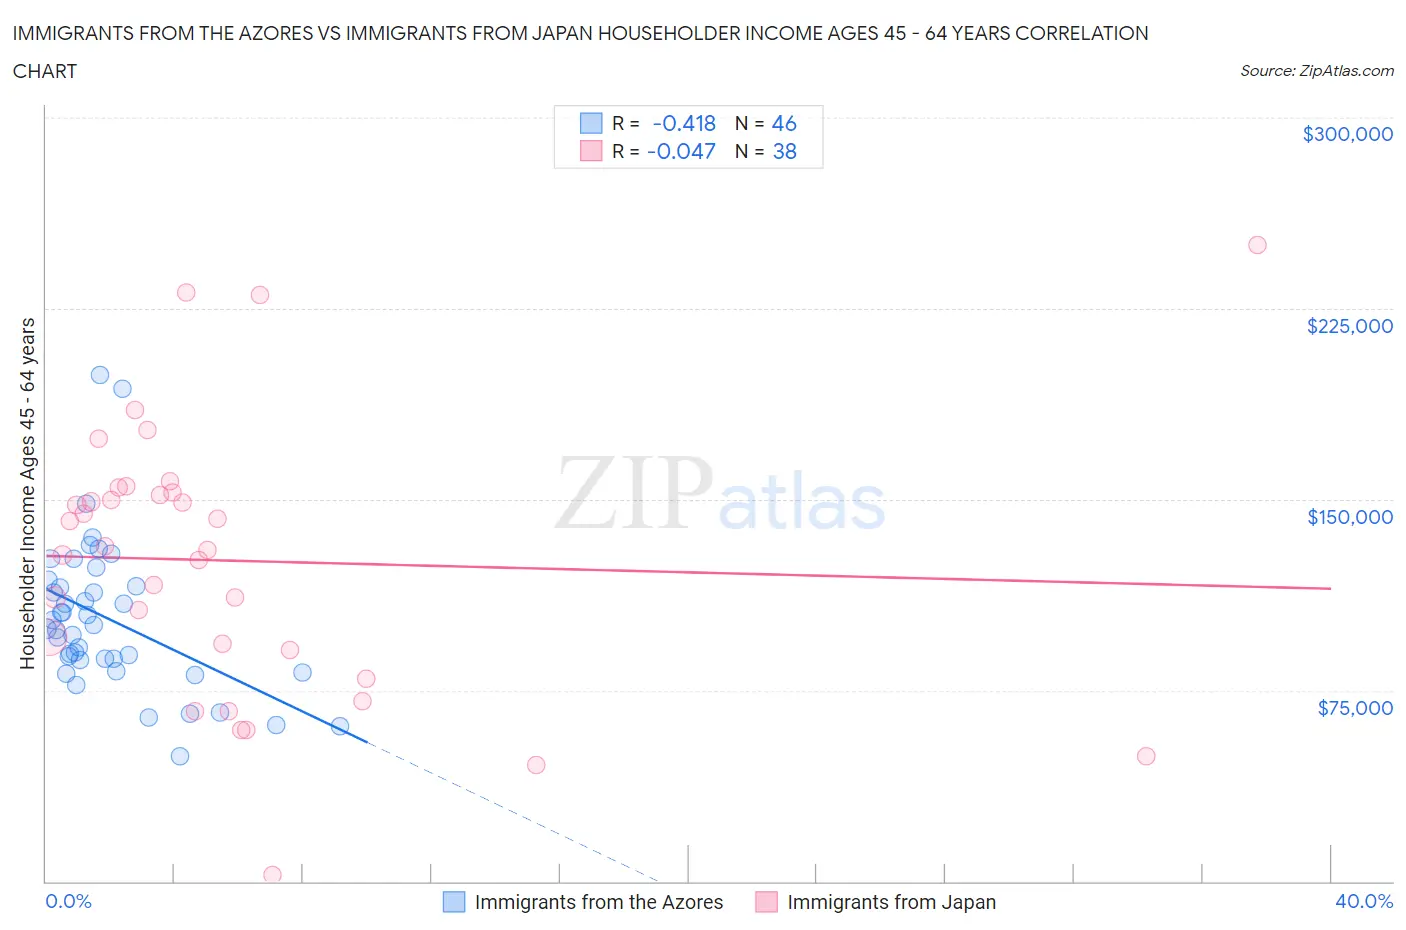 Immigrants from the Azores vs Immigrants from Japan Householder Income Ages 45 - 64 years